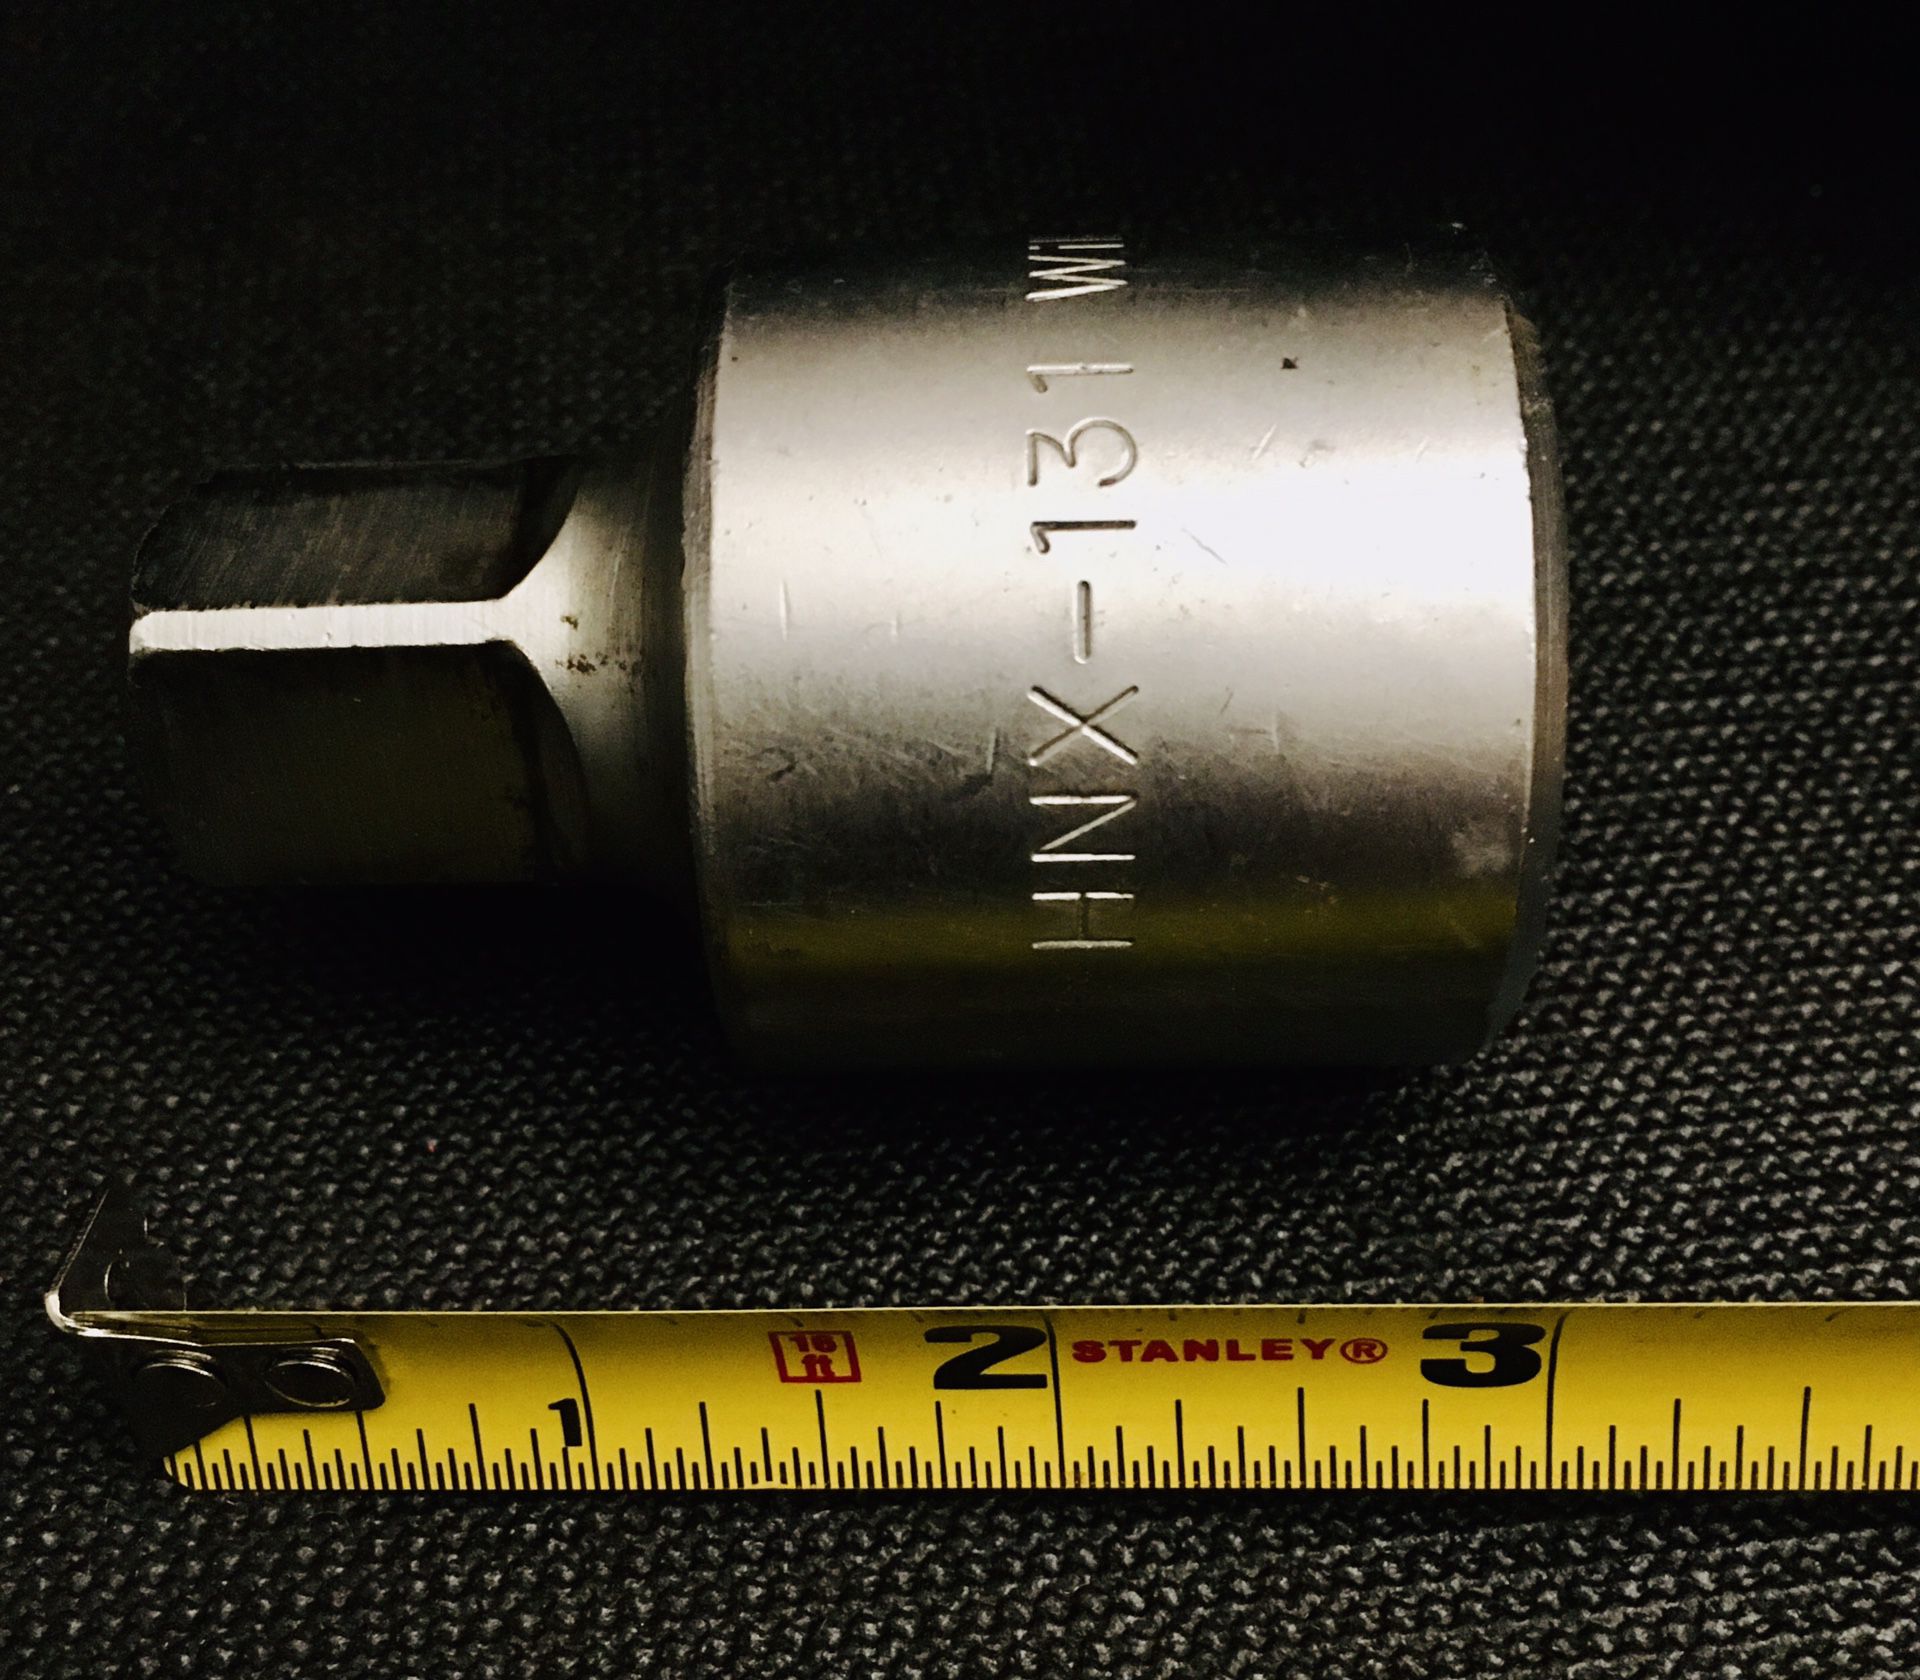 Williams 1” to 3/4 adapter